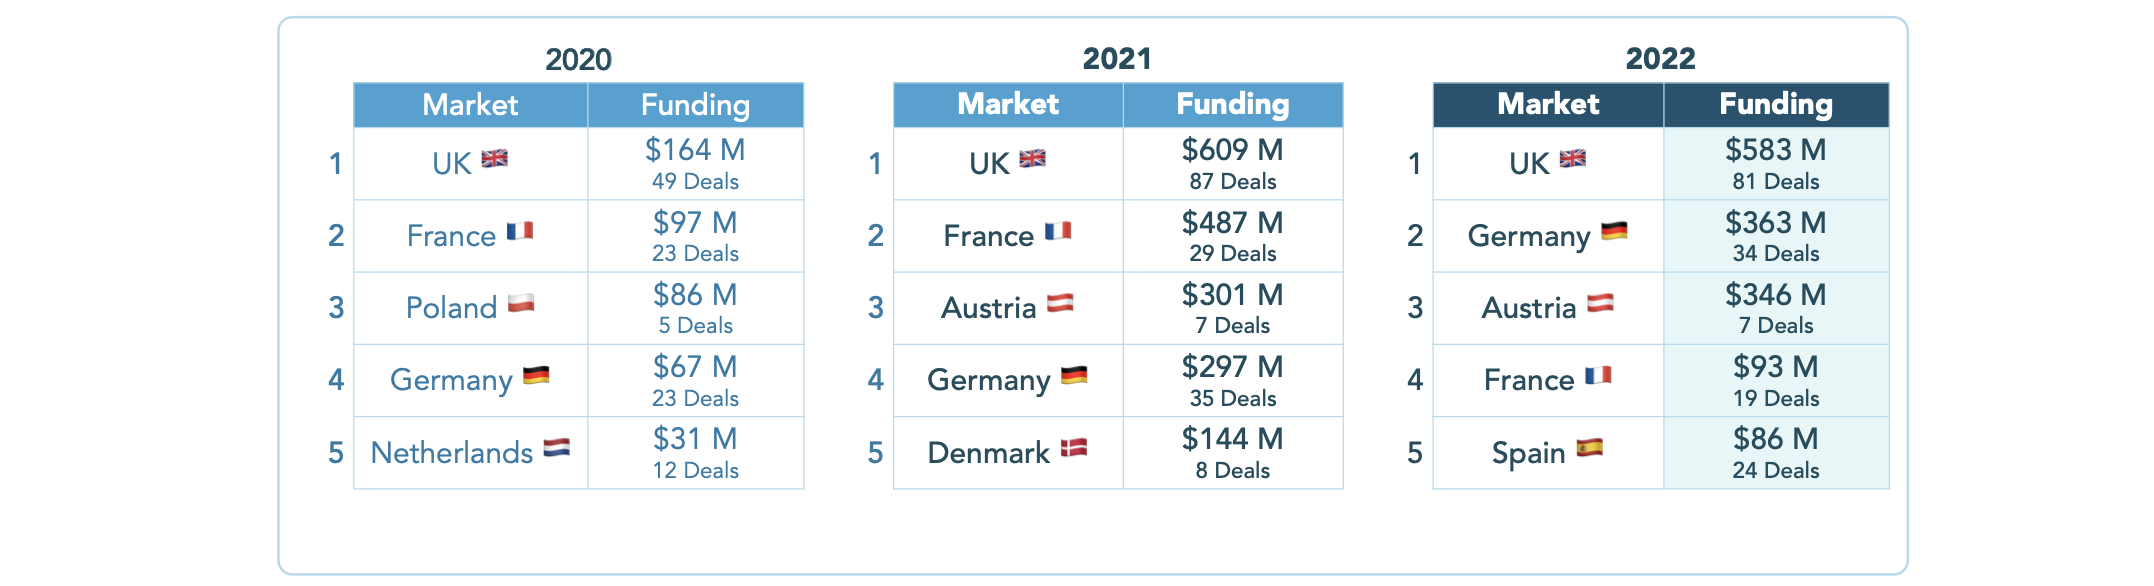 Educational technology funding in Europe by market.  Image Credits: Brighteye Ventures